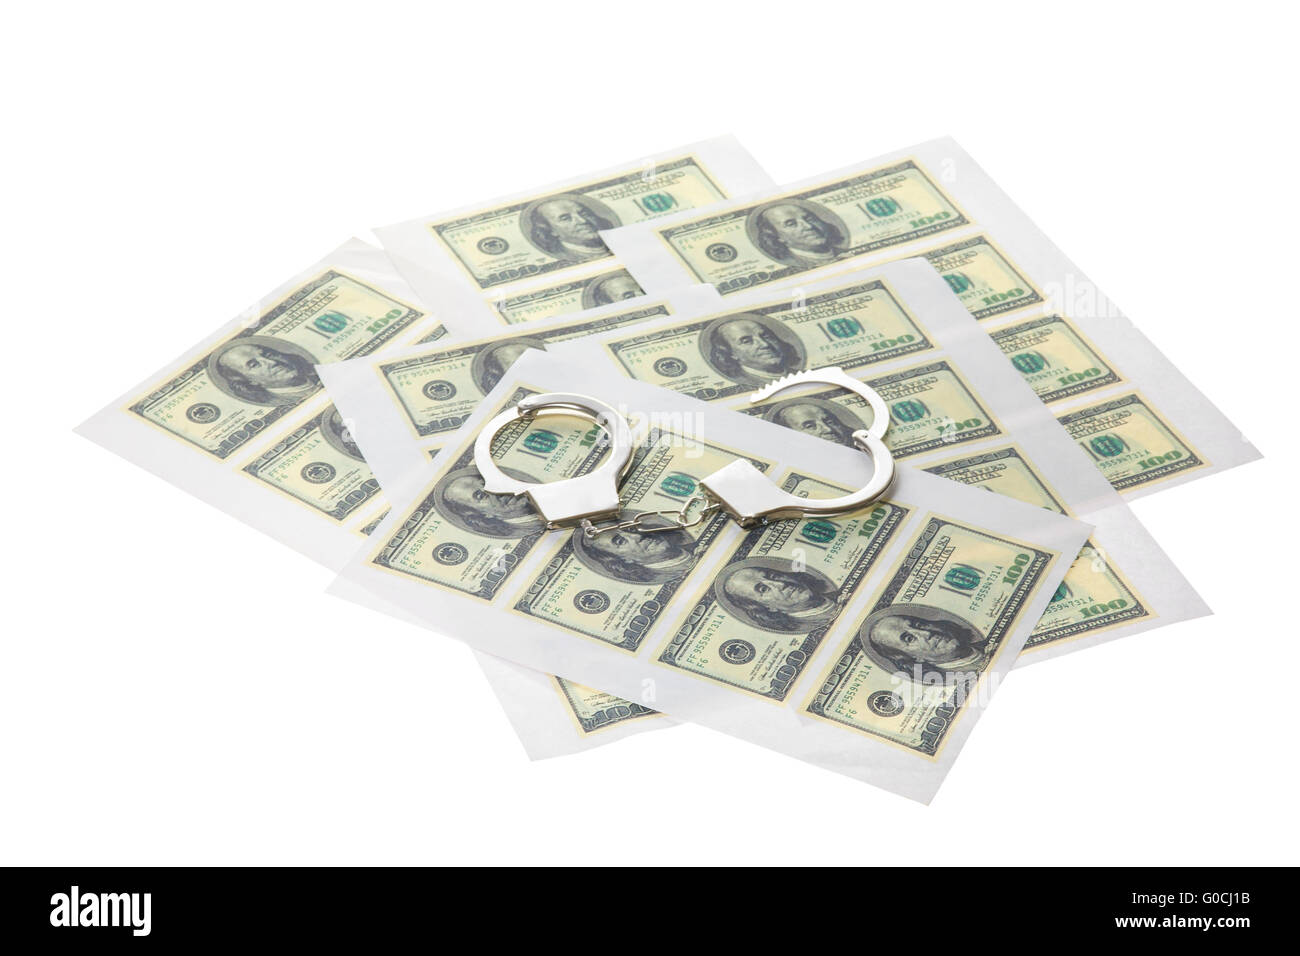 Printed sheets with dollars and handcuffs. Stock Photo